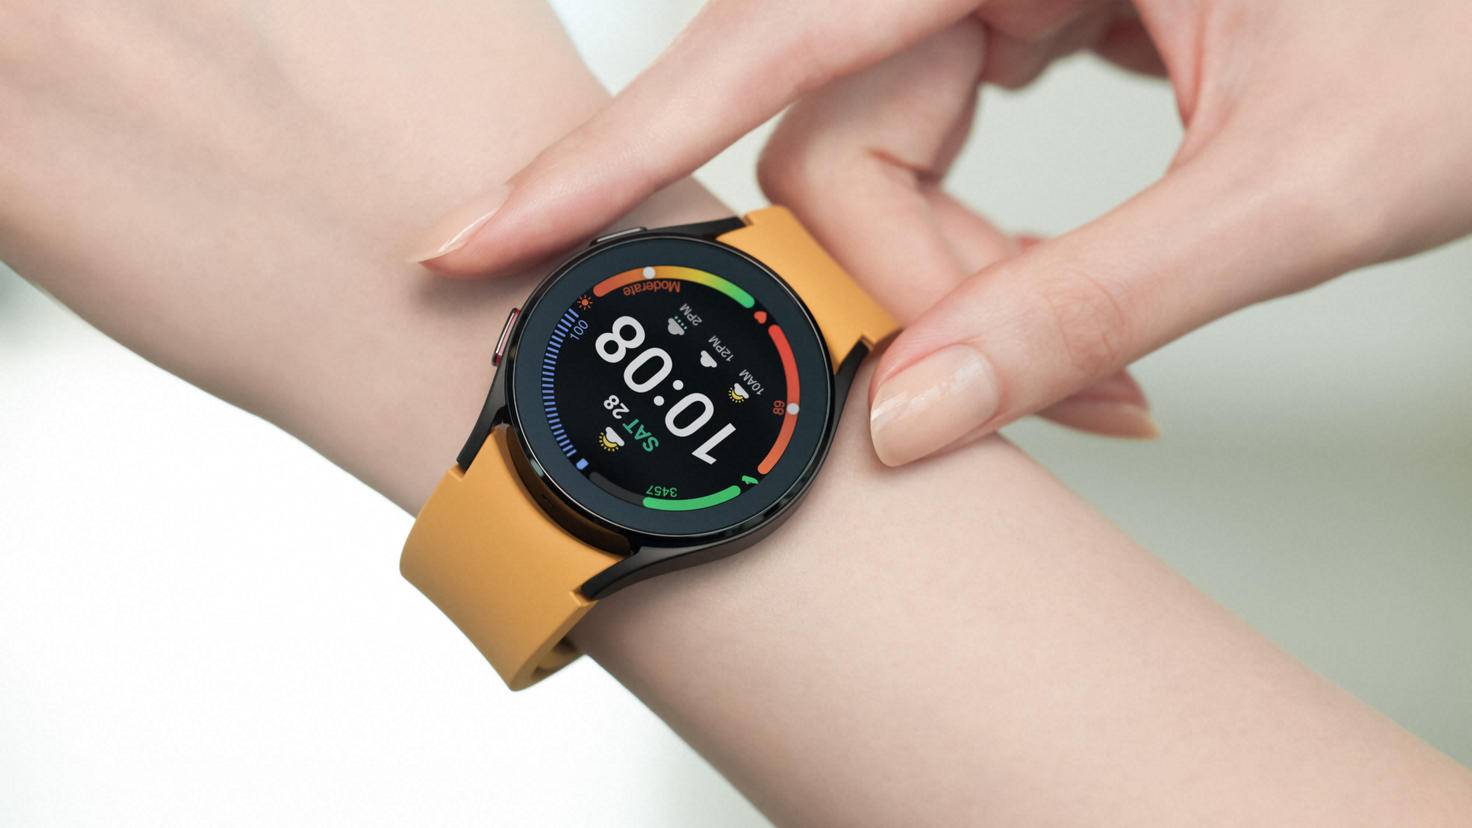 The Galaxy Watch 4 offers numerous health functions in addition to GPS.